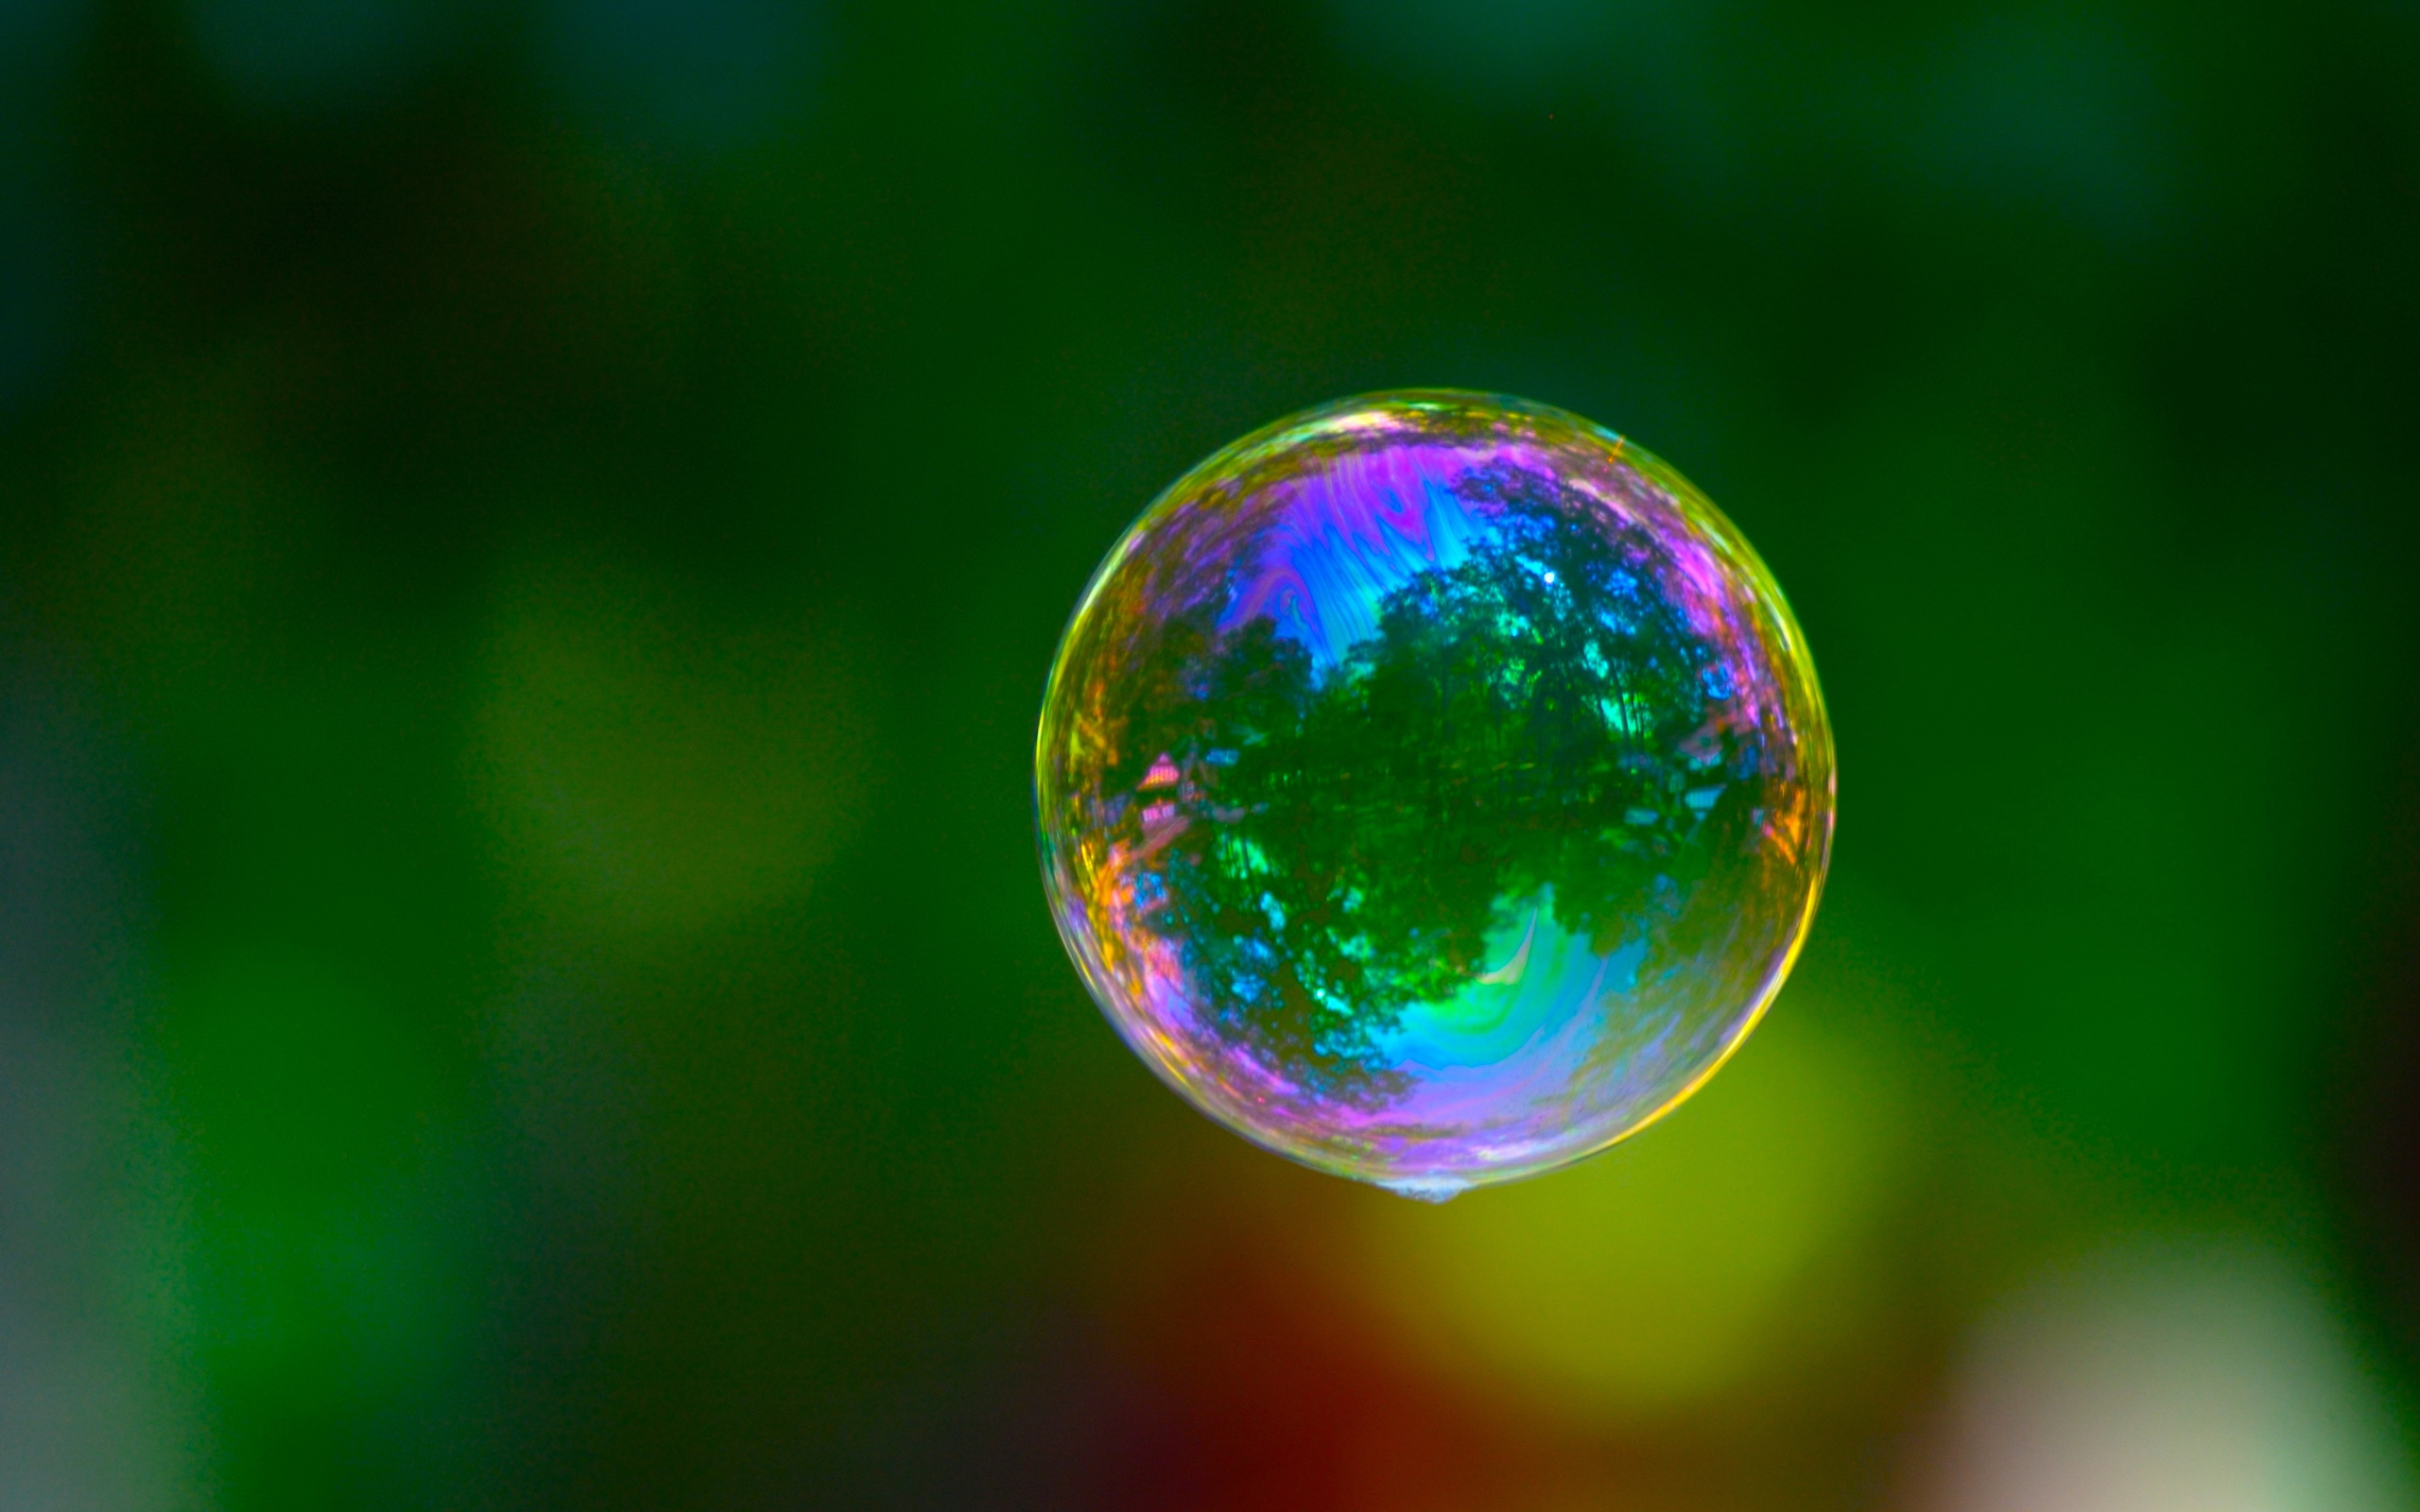 Wallpapers bubble soap ball on the desktop